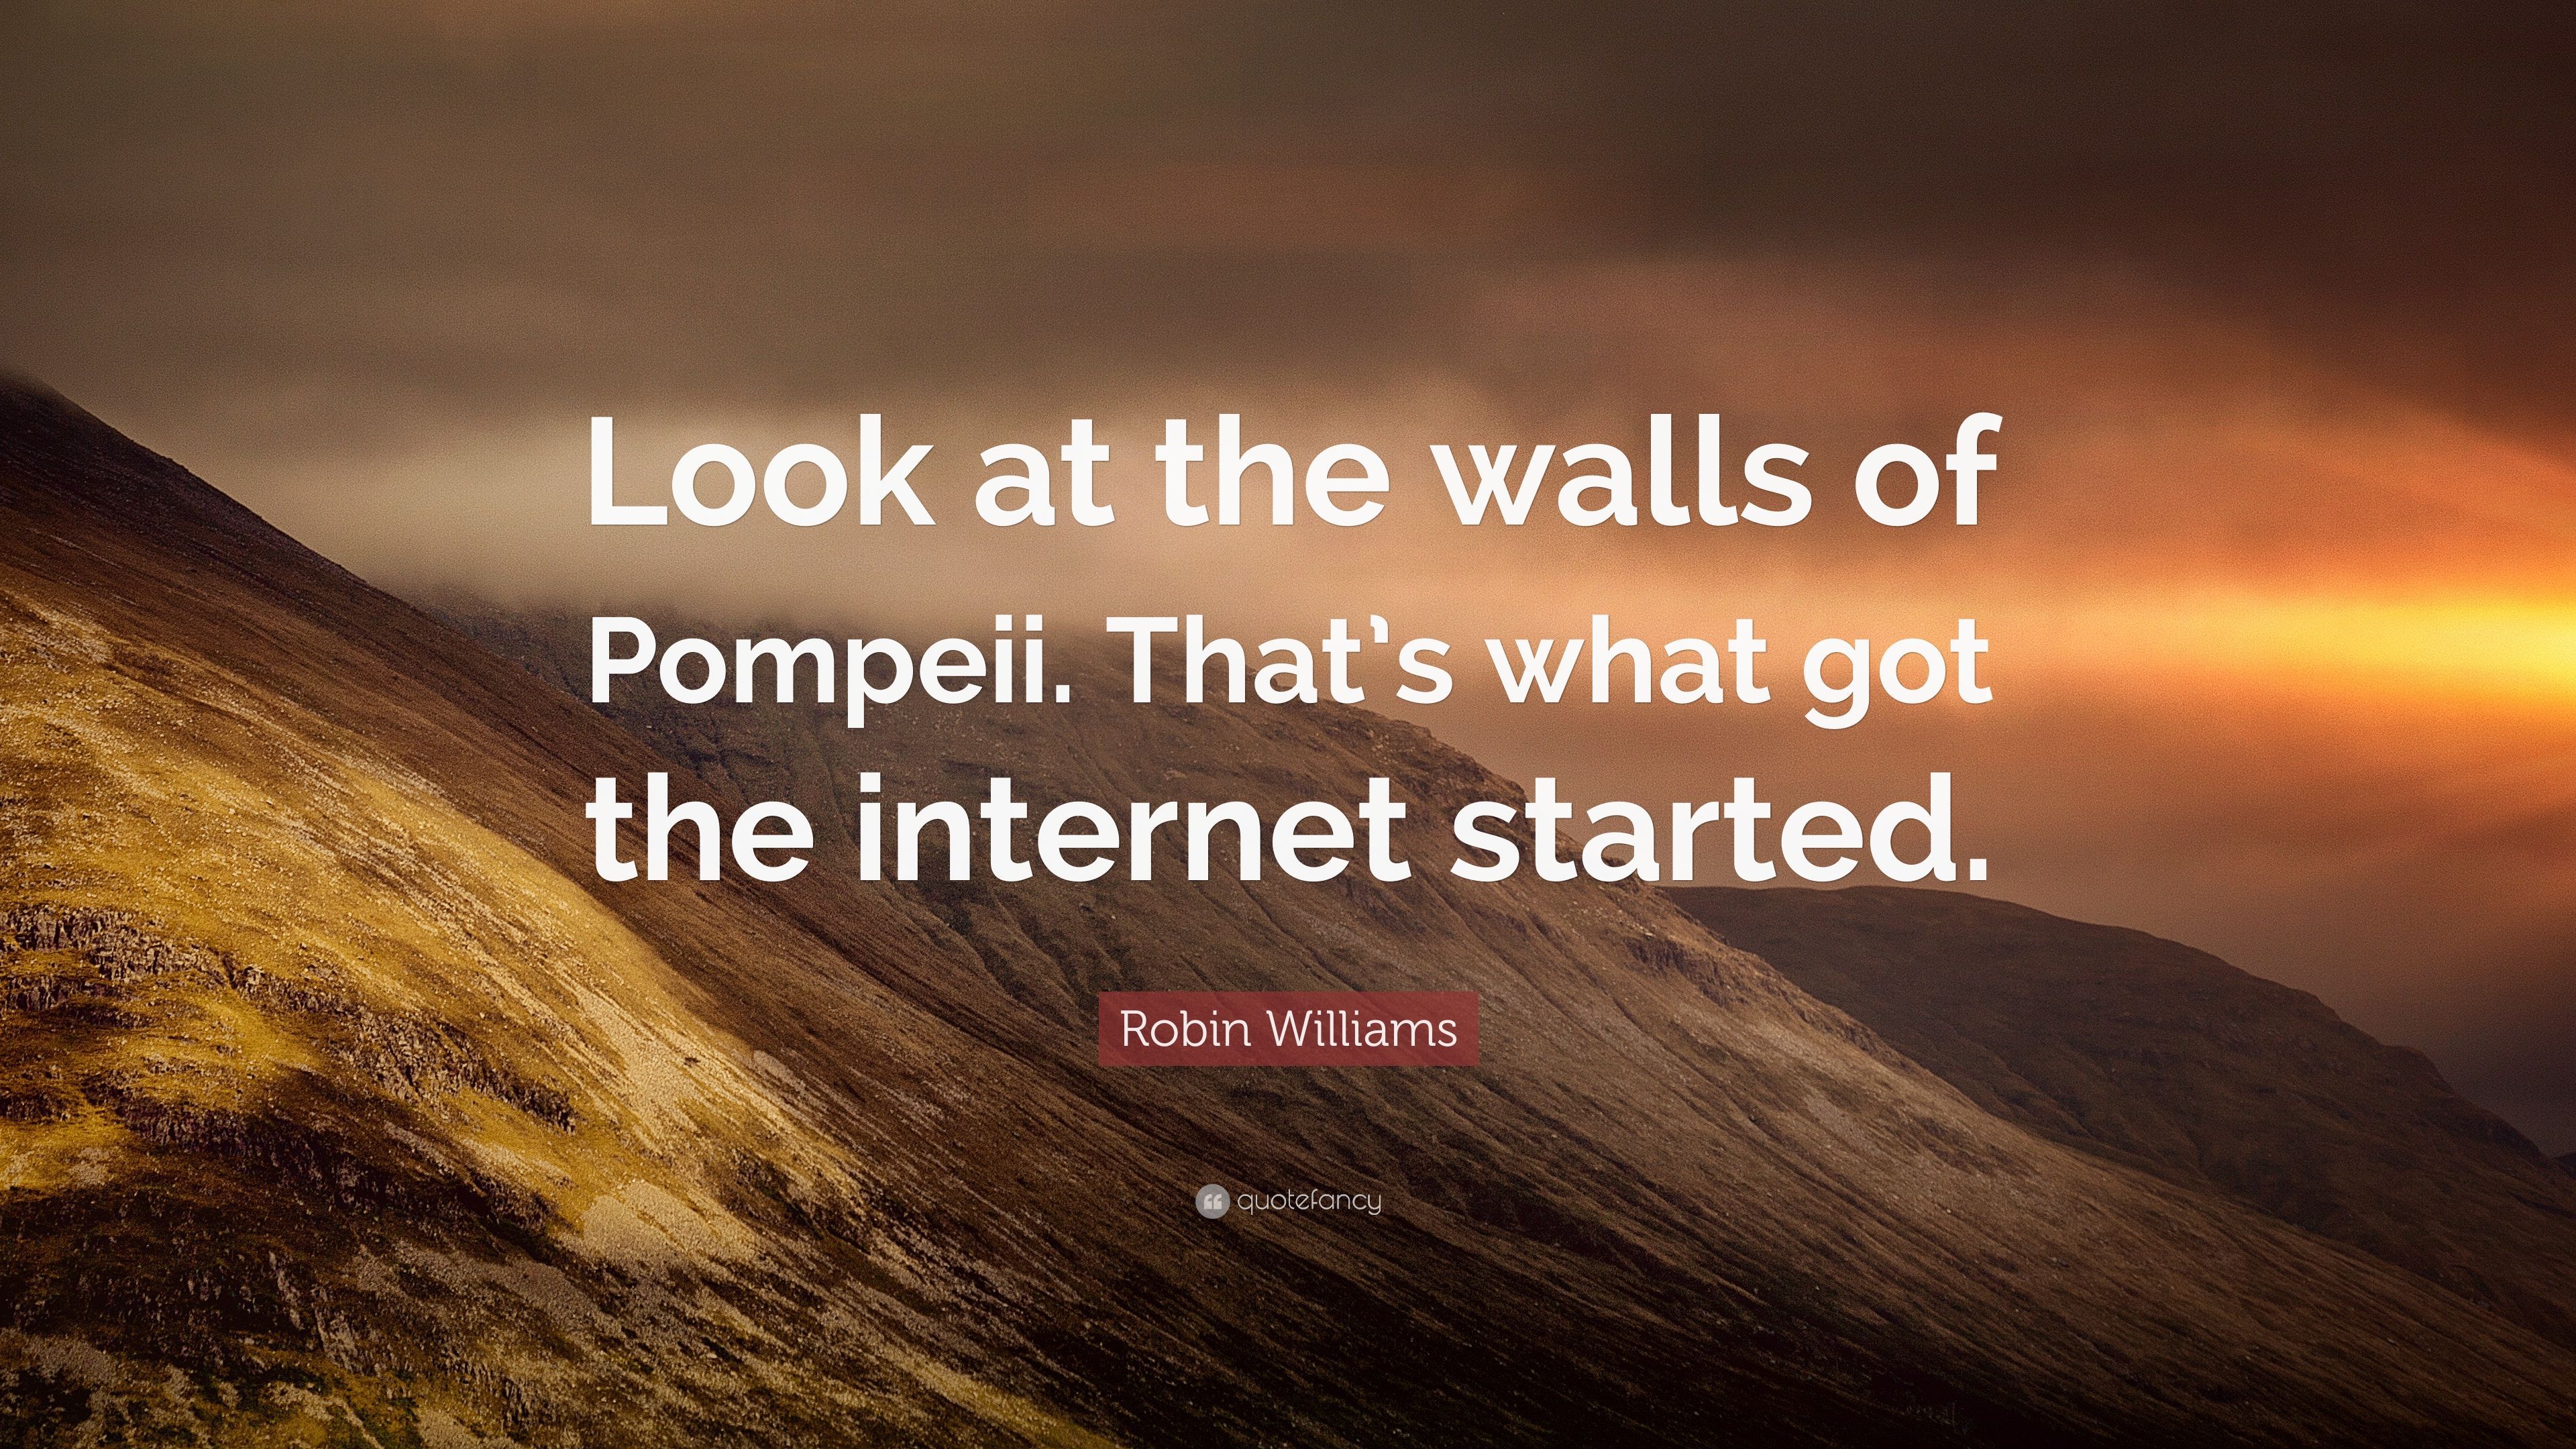 Robin Williams Quote: “Look at the walls of Pompeii. That's what got